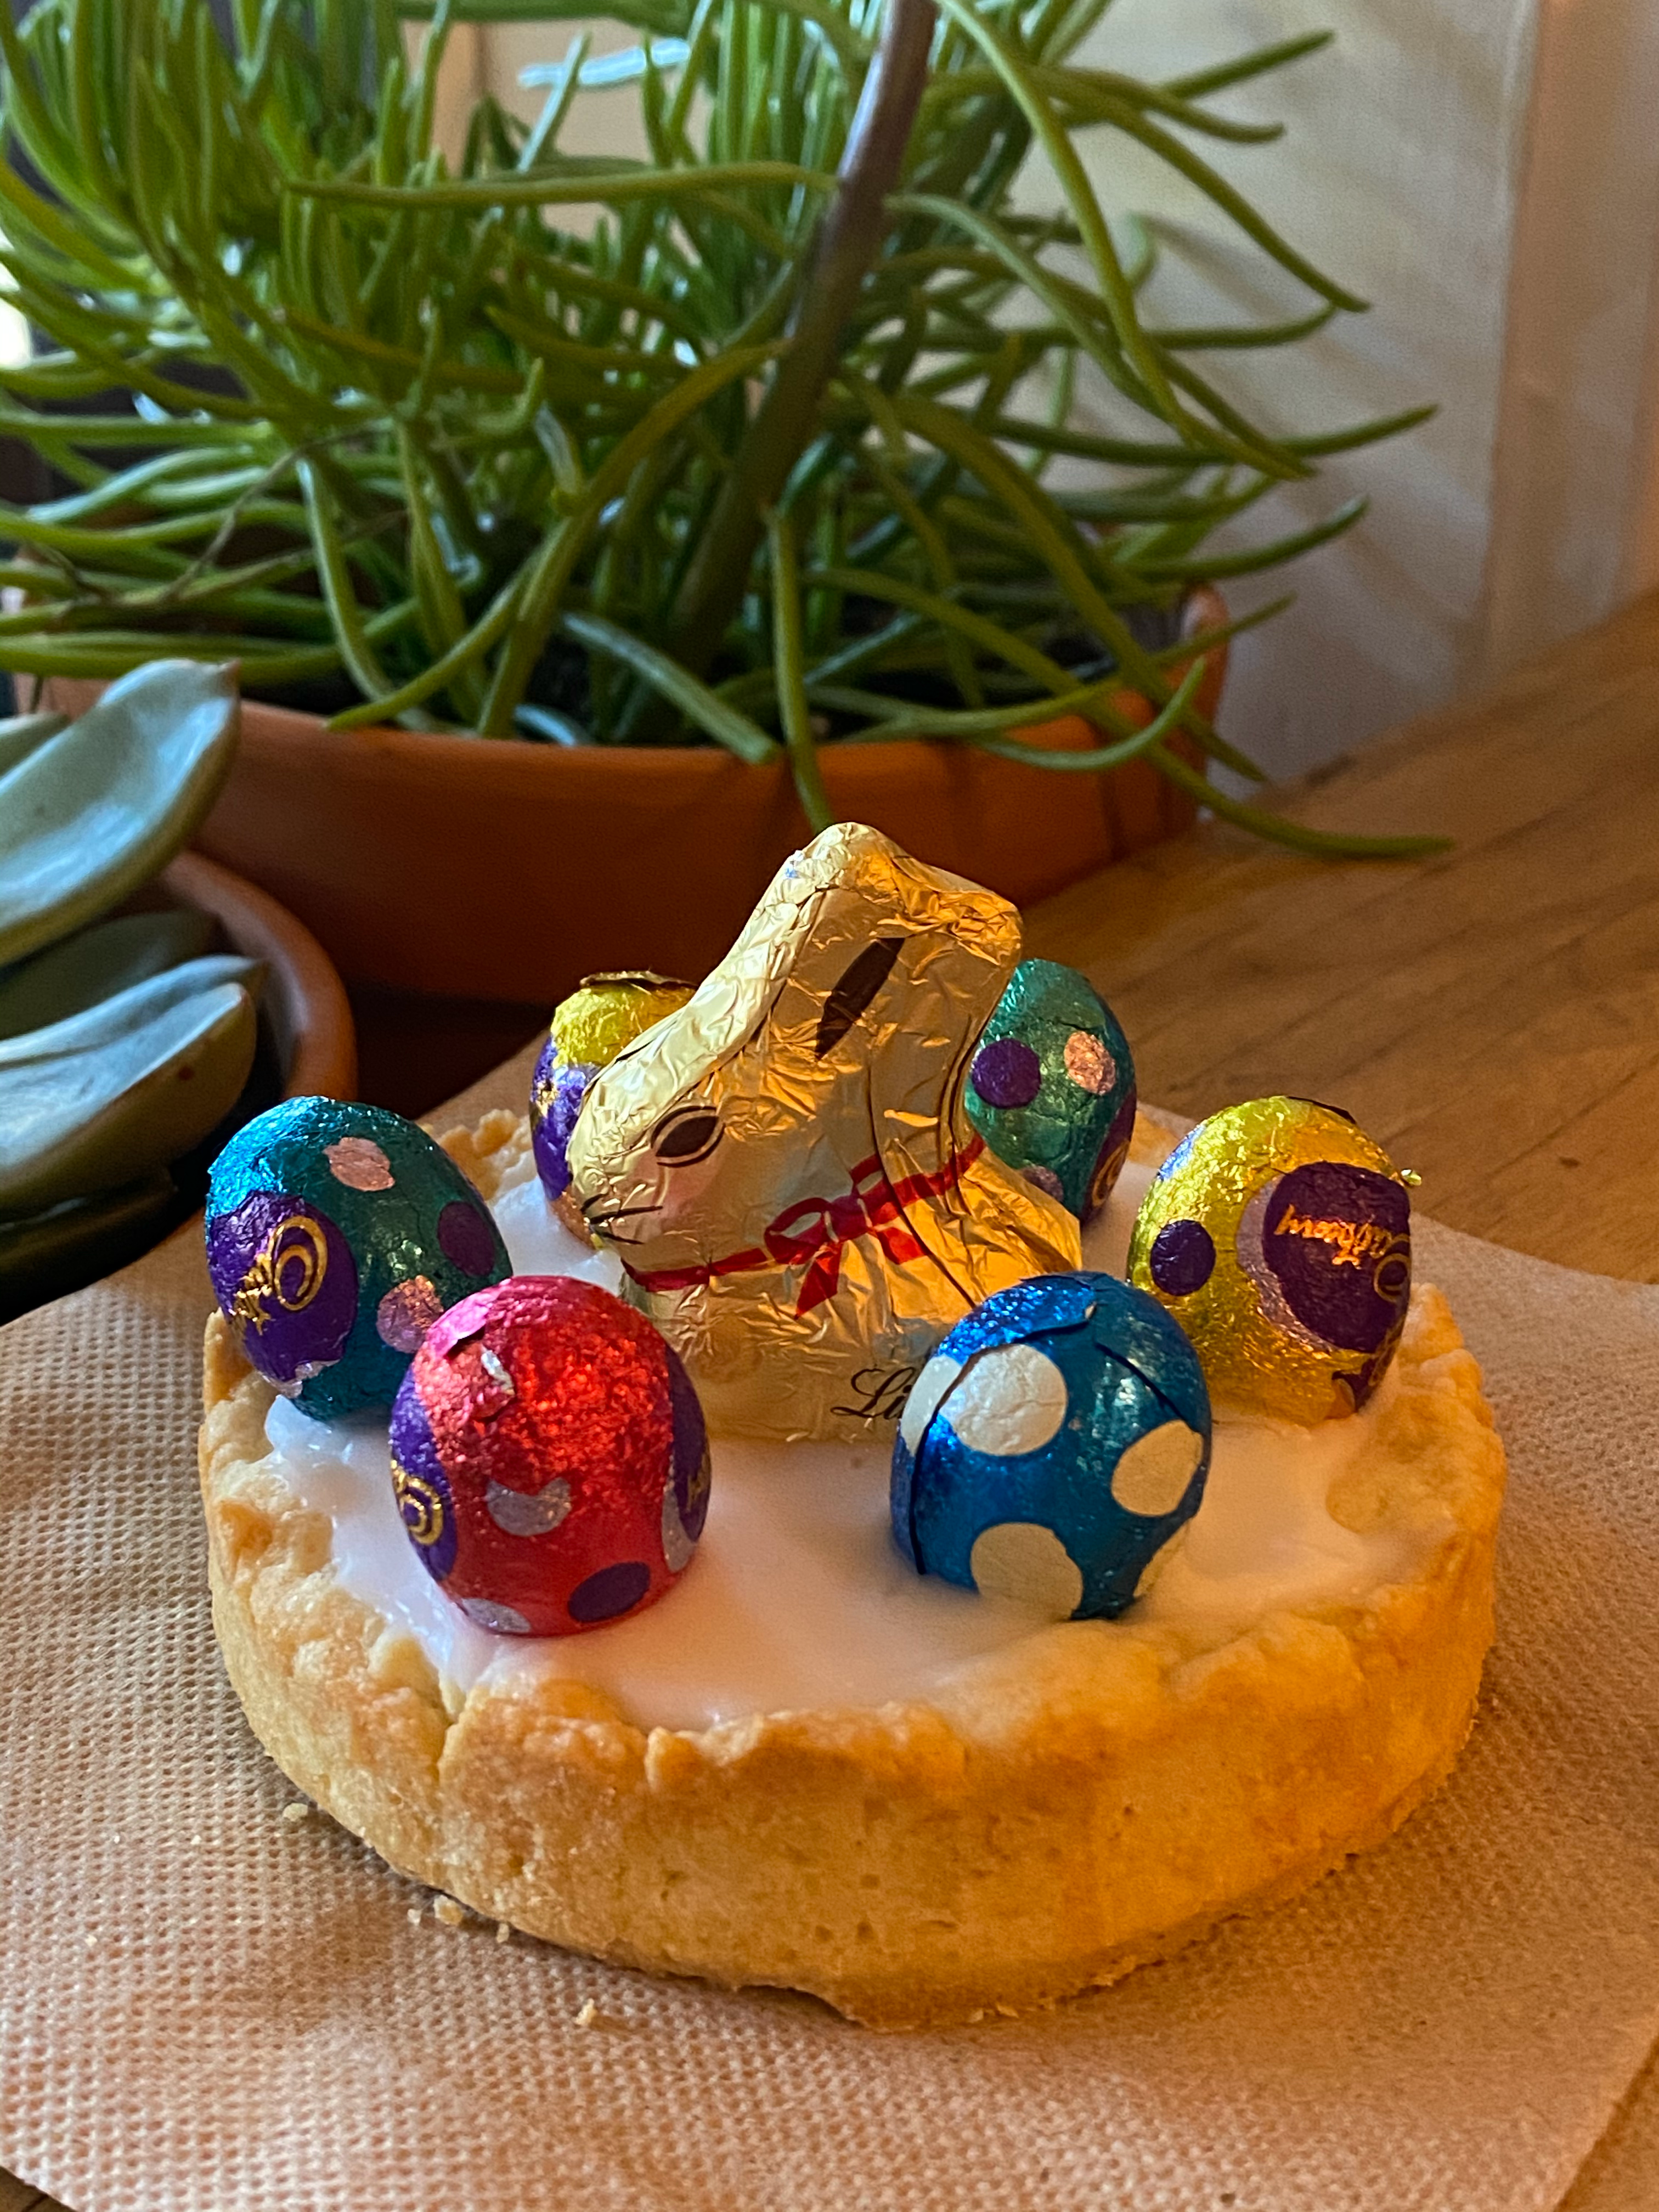 German Easter baking and decorations